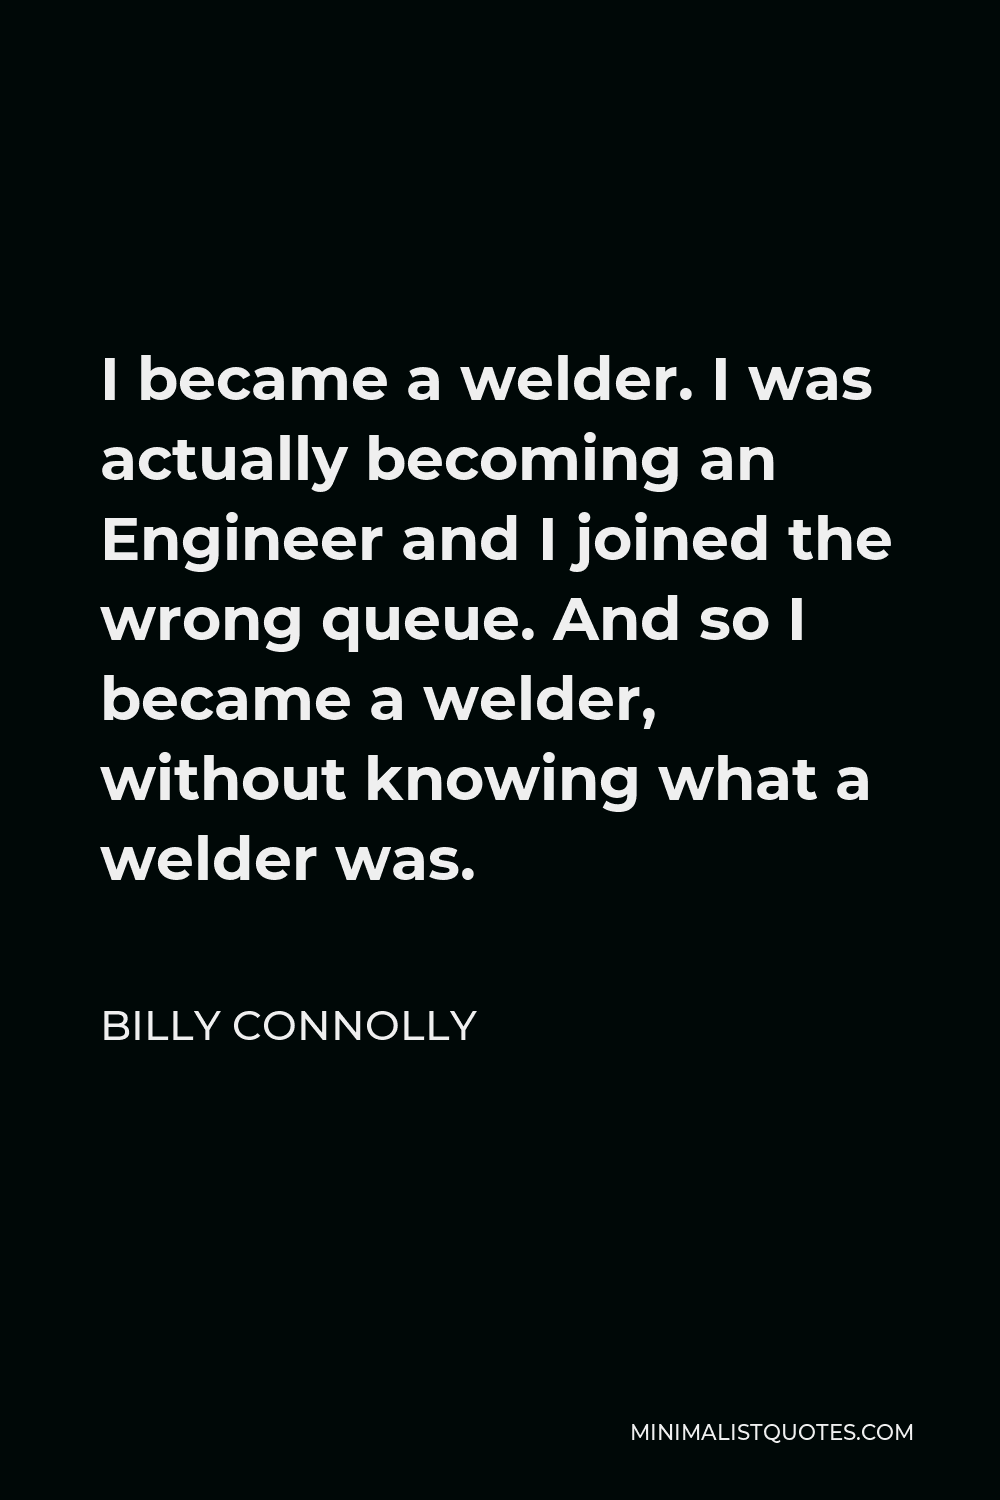 Billy Connolly Quote - I became a welder. I was actually becoming an Engineer and I joined the wrong queue. And so I became a welder, without knowing what a welder was.